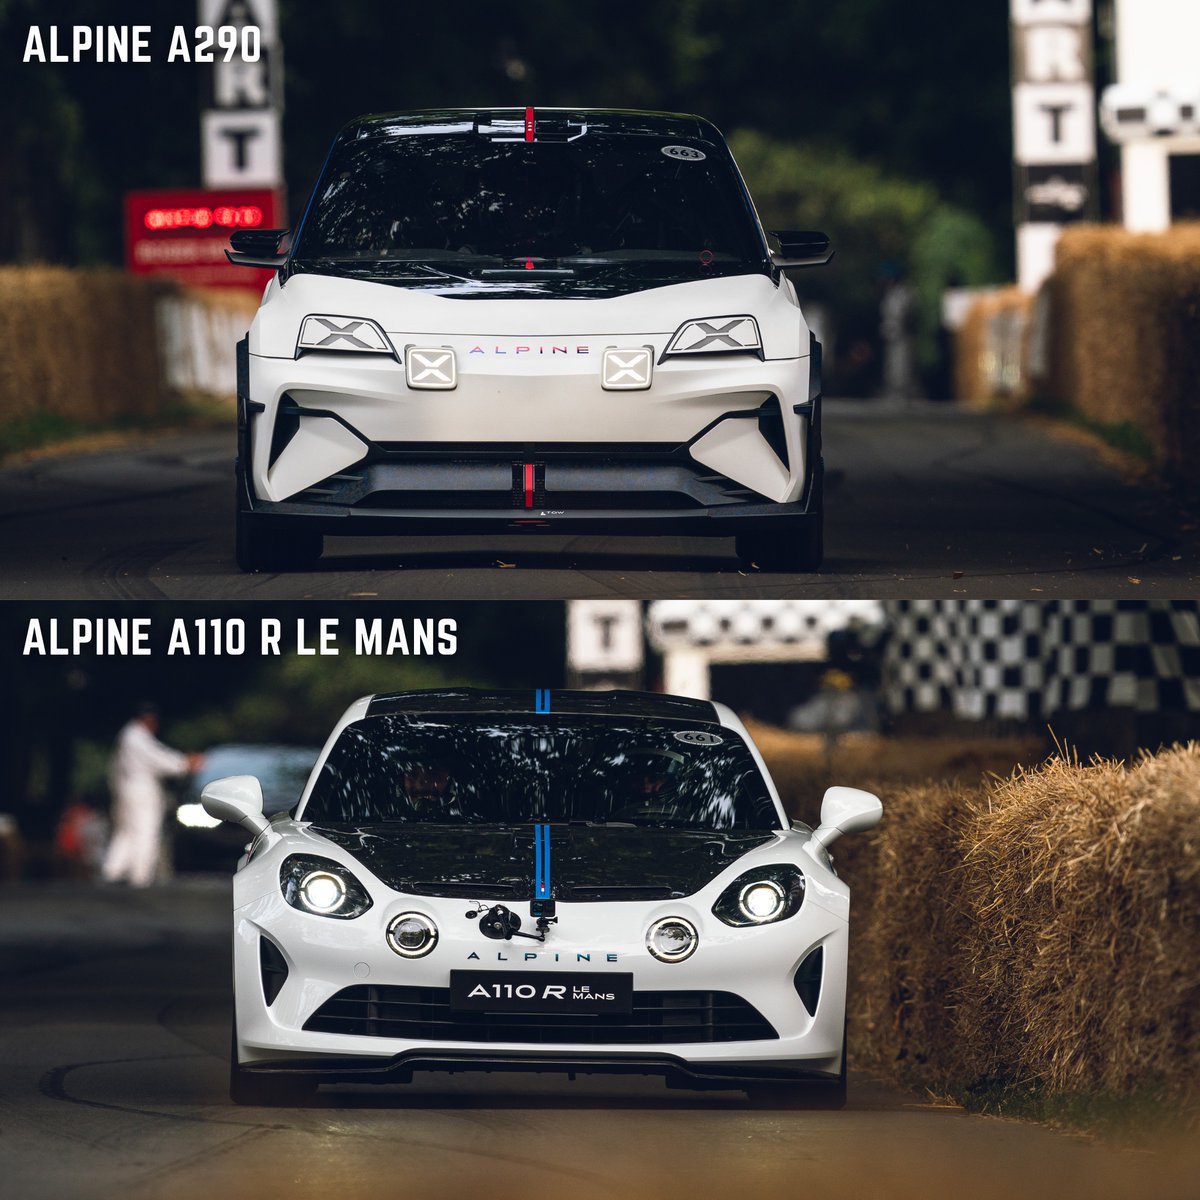 Two very different flavours of #Alpine road cars, #EV and 1.8-litre turbocharged four-cylinder/ Which one would you take for a drive on a sunny weekend? #AlpineA290 #AlpineA110 #AlpineA110R